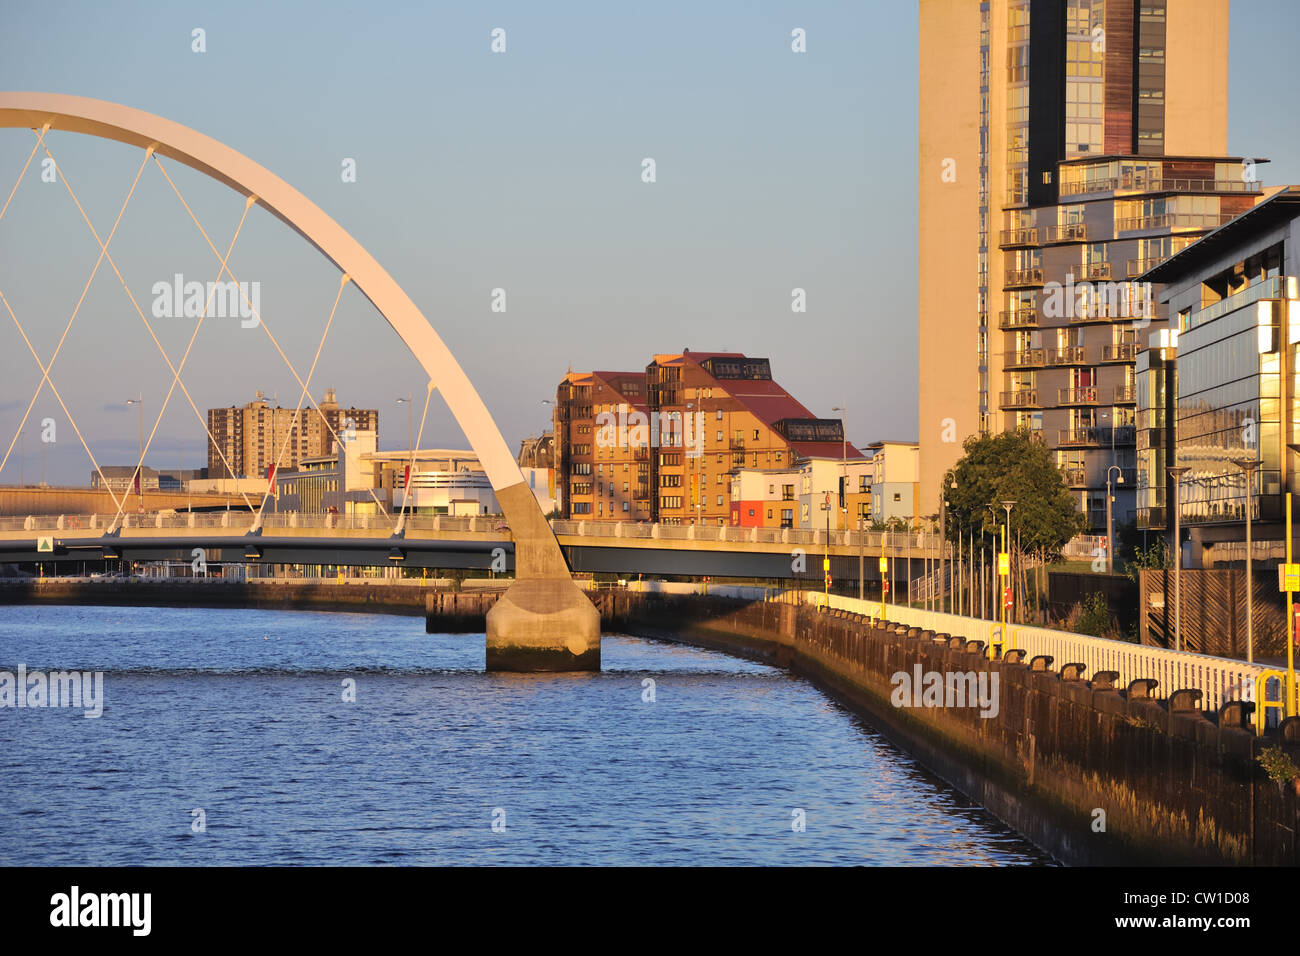 A low evening sun casts a warm glow over the river walkway in the city of Glasgow. Stock Photo